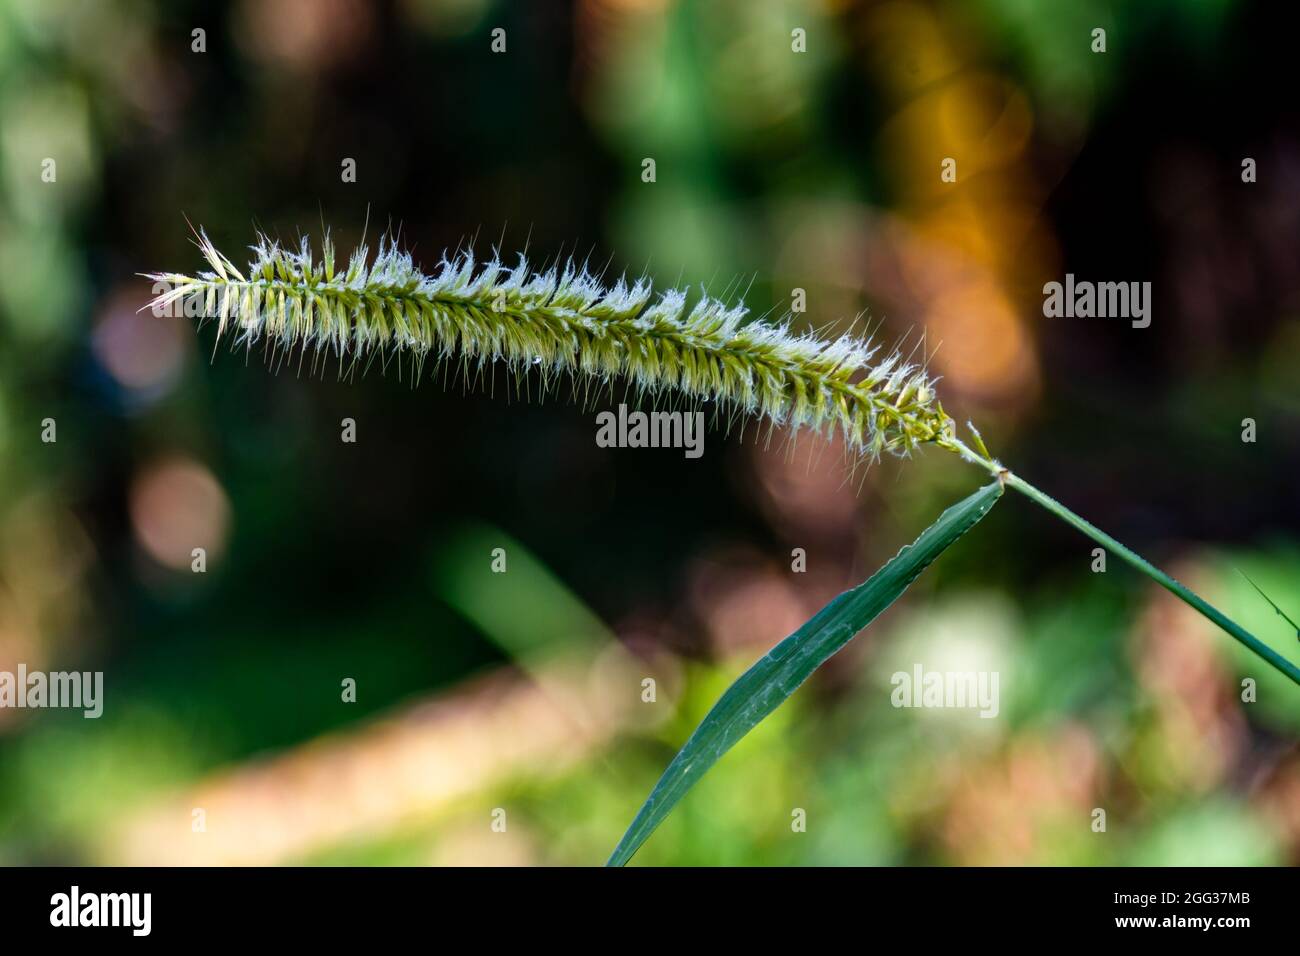 Elephant grass flowers that grow in the fields, have yellow and white colors, like animal feathers Stock Photo